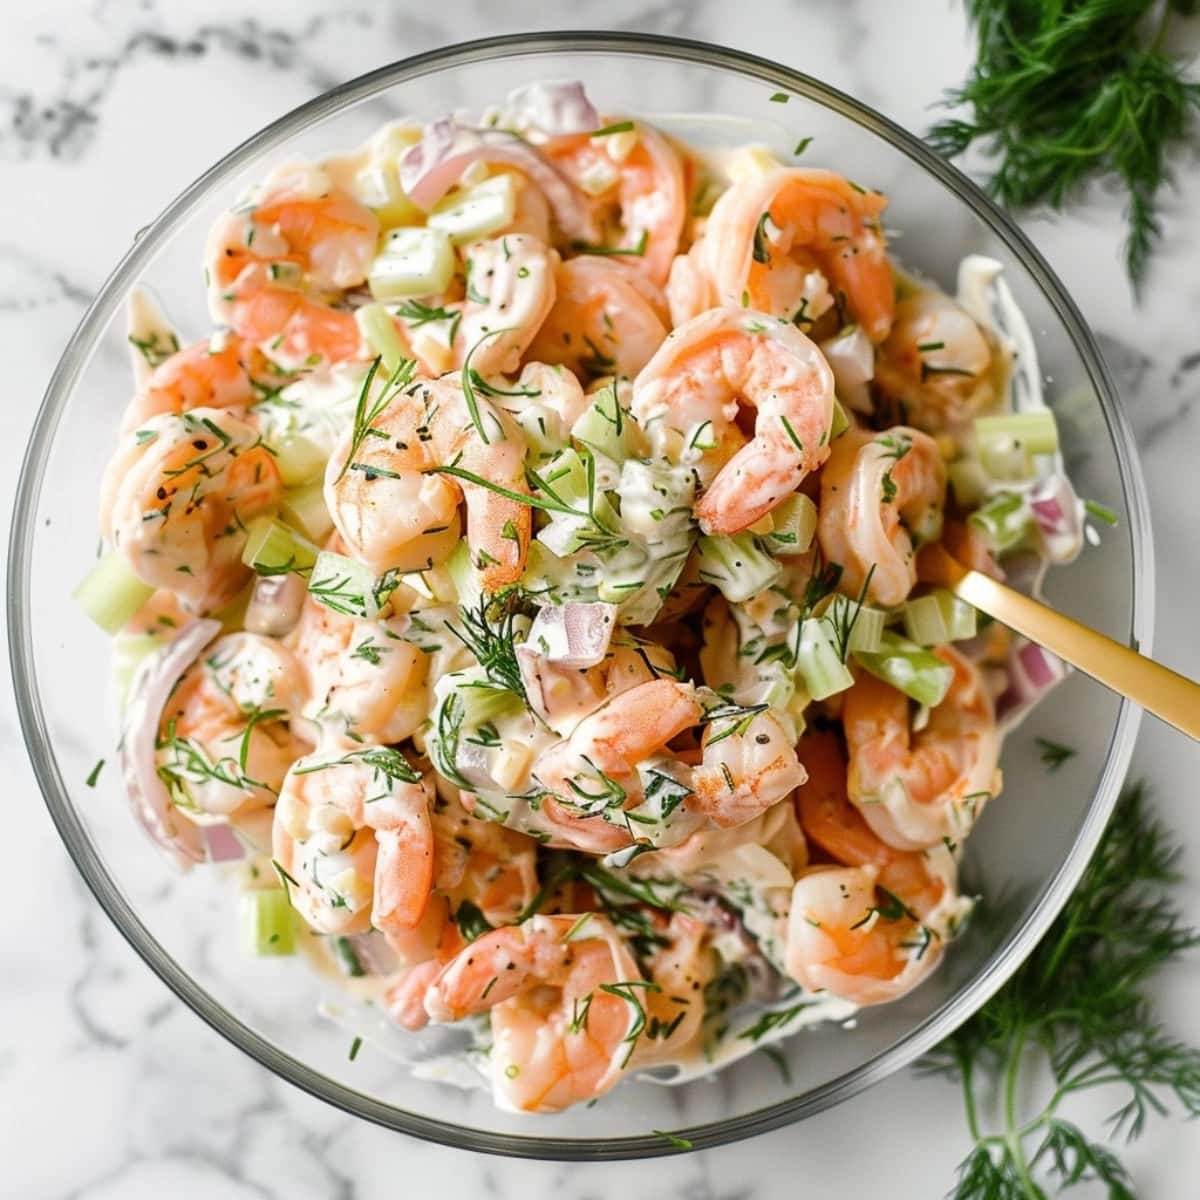 Shrimp in a glass bowl with mayonnaise dressing, red onion and celery with dill.